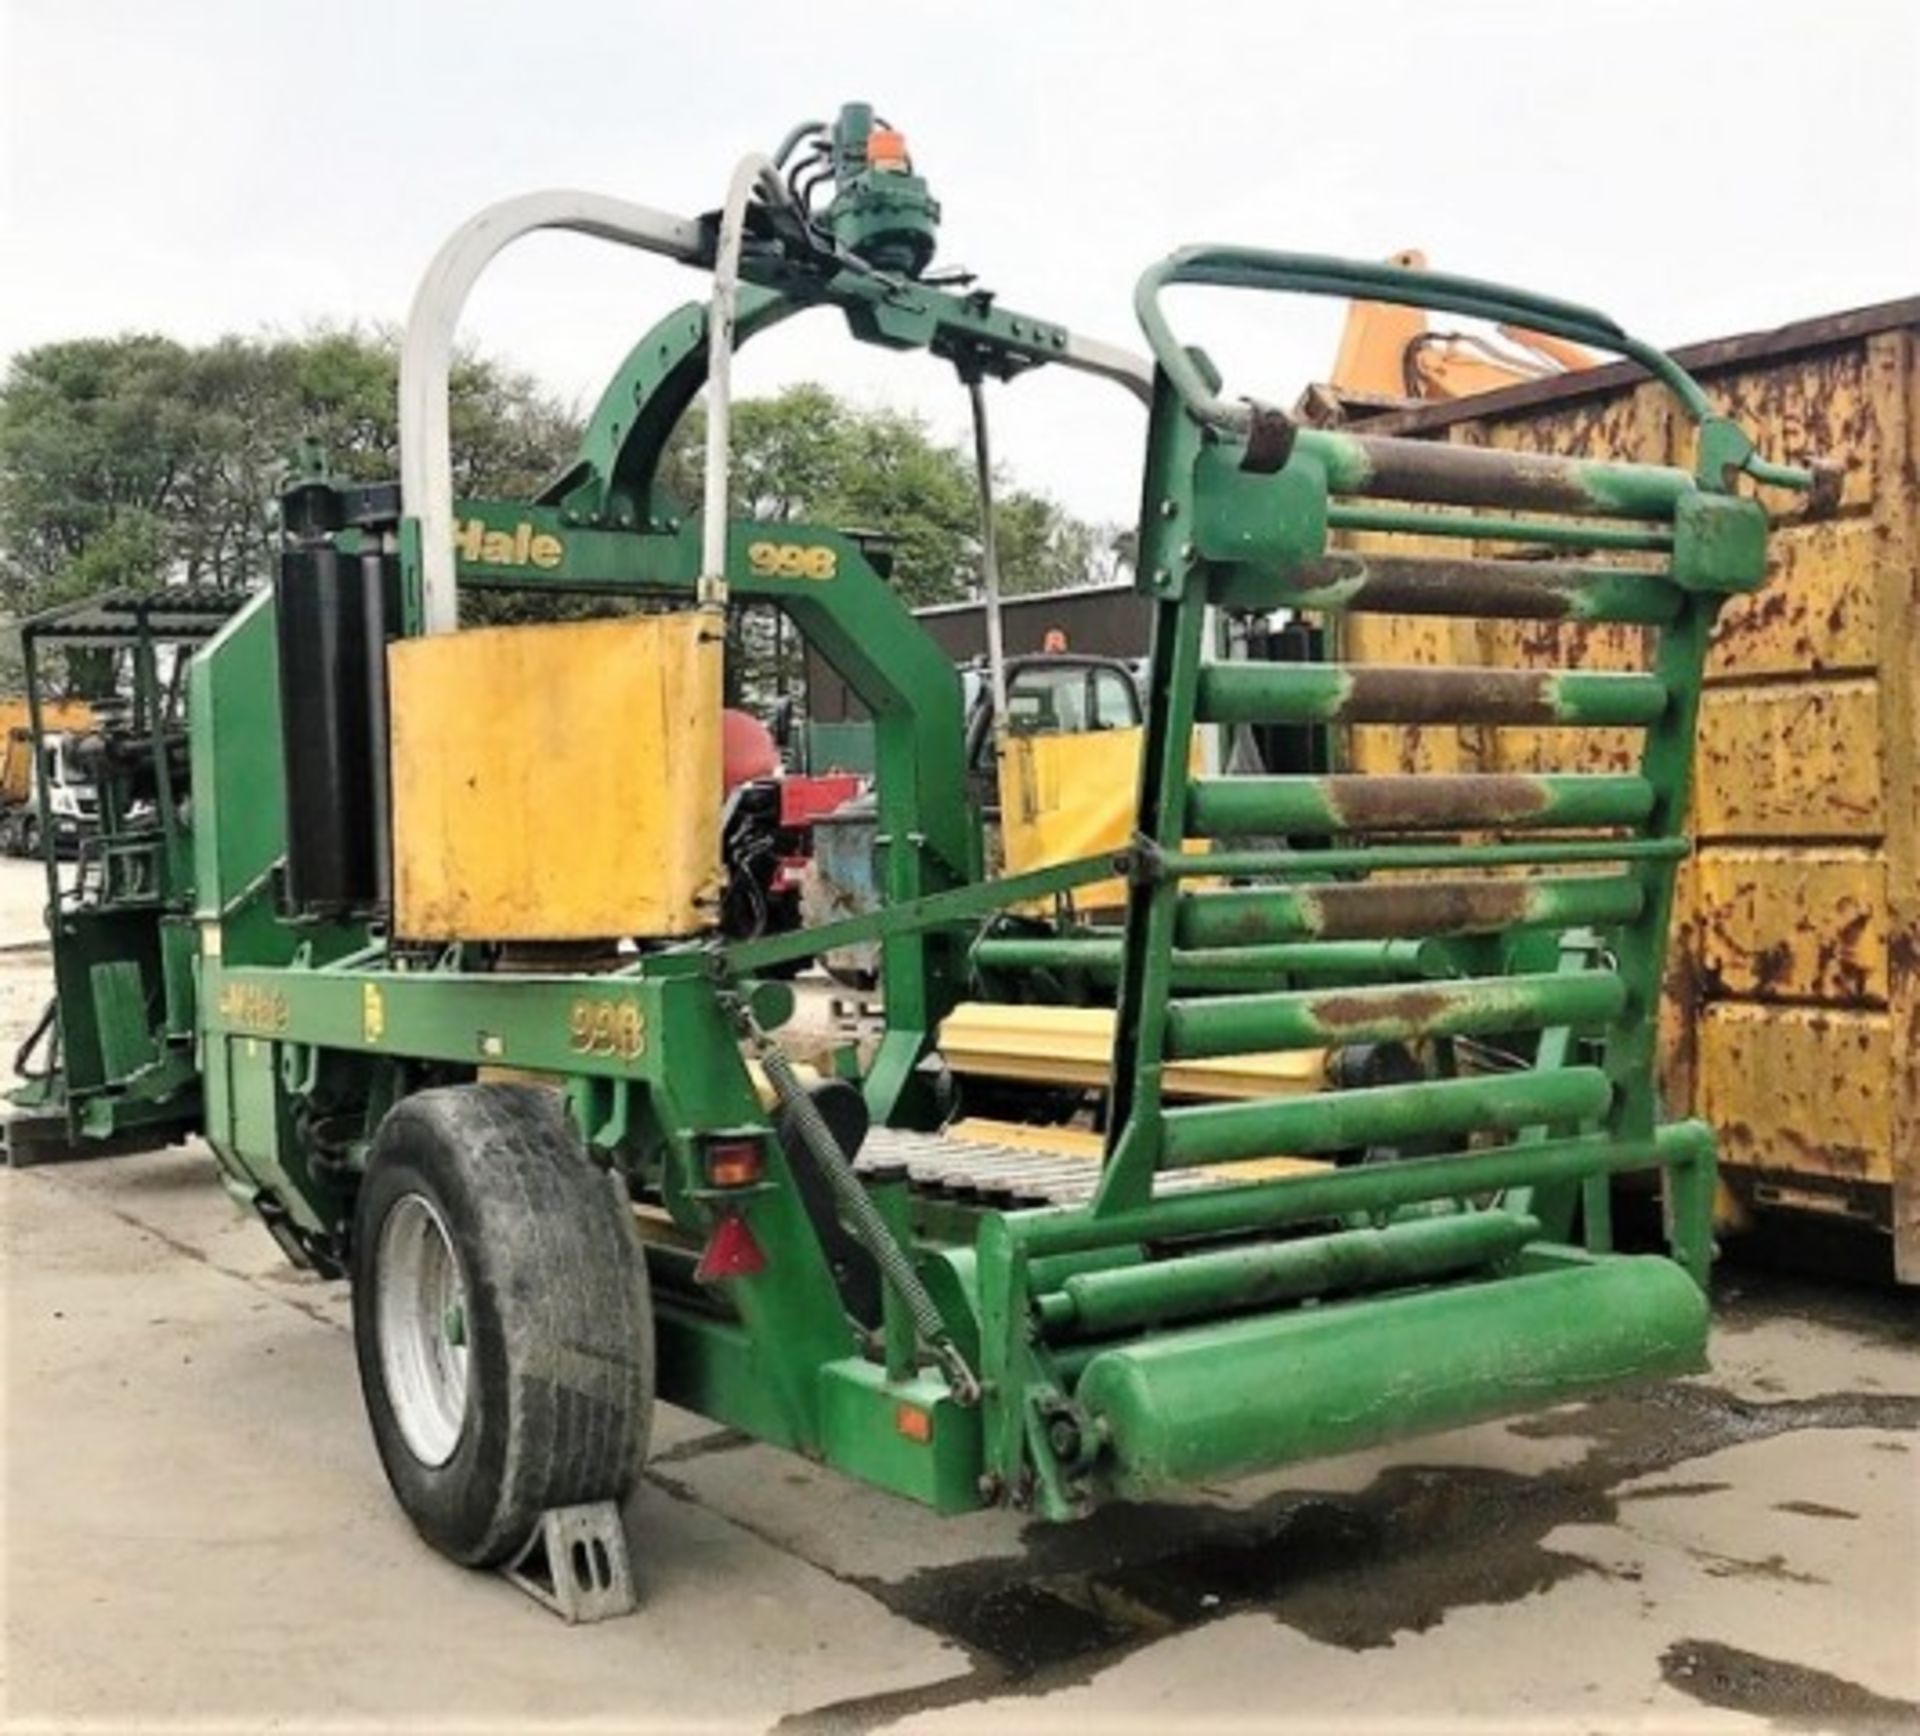 2007 MCHALE 998 square bale wrapper s/n 250627. Runs on diesel engine. c/w 2 remote controls, servic - Image 5 of 20